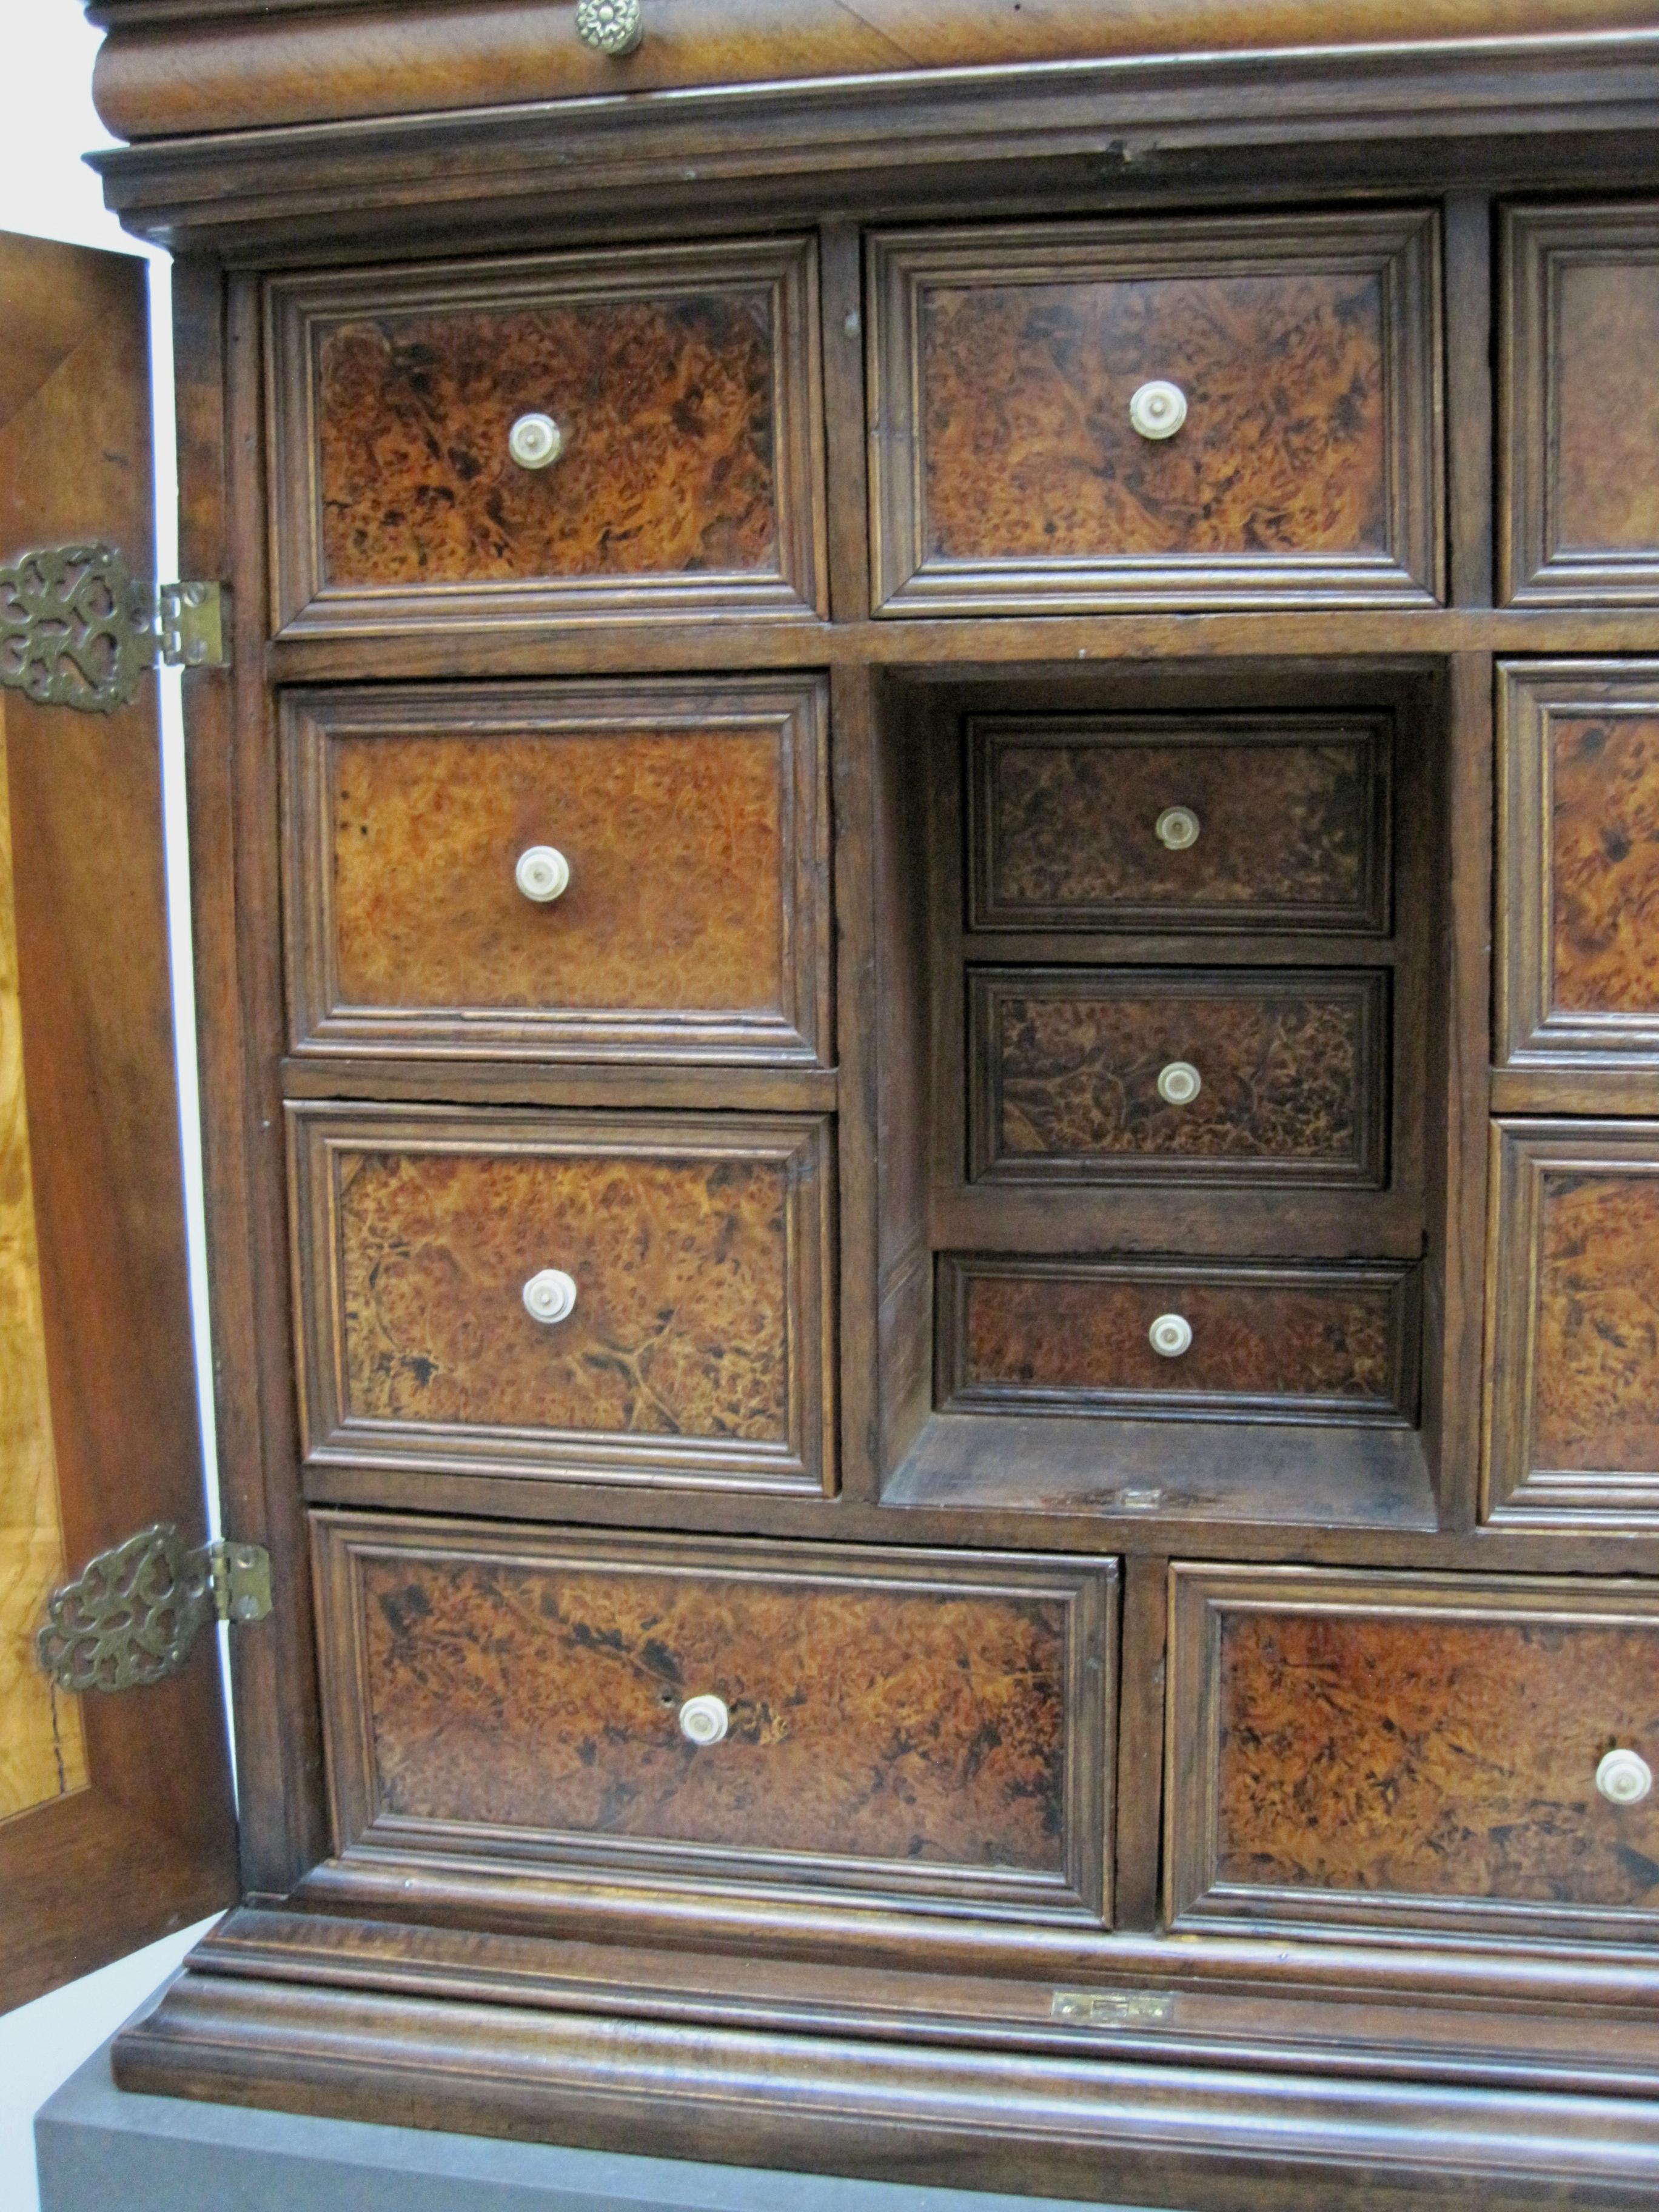 Carved Rare 17th Century Baroque Cabinet, South Germany Probably Augsburg, Wunderkammer For Sale